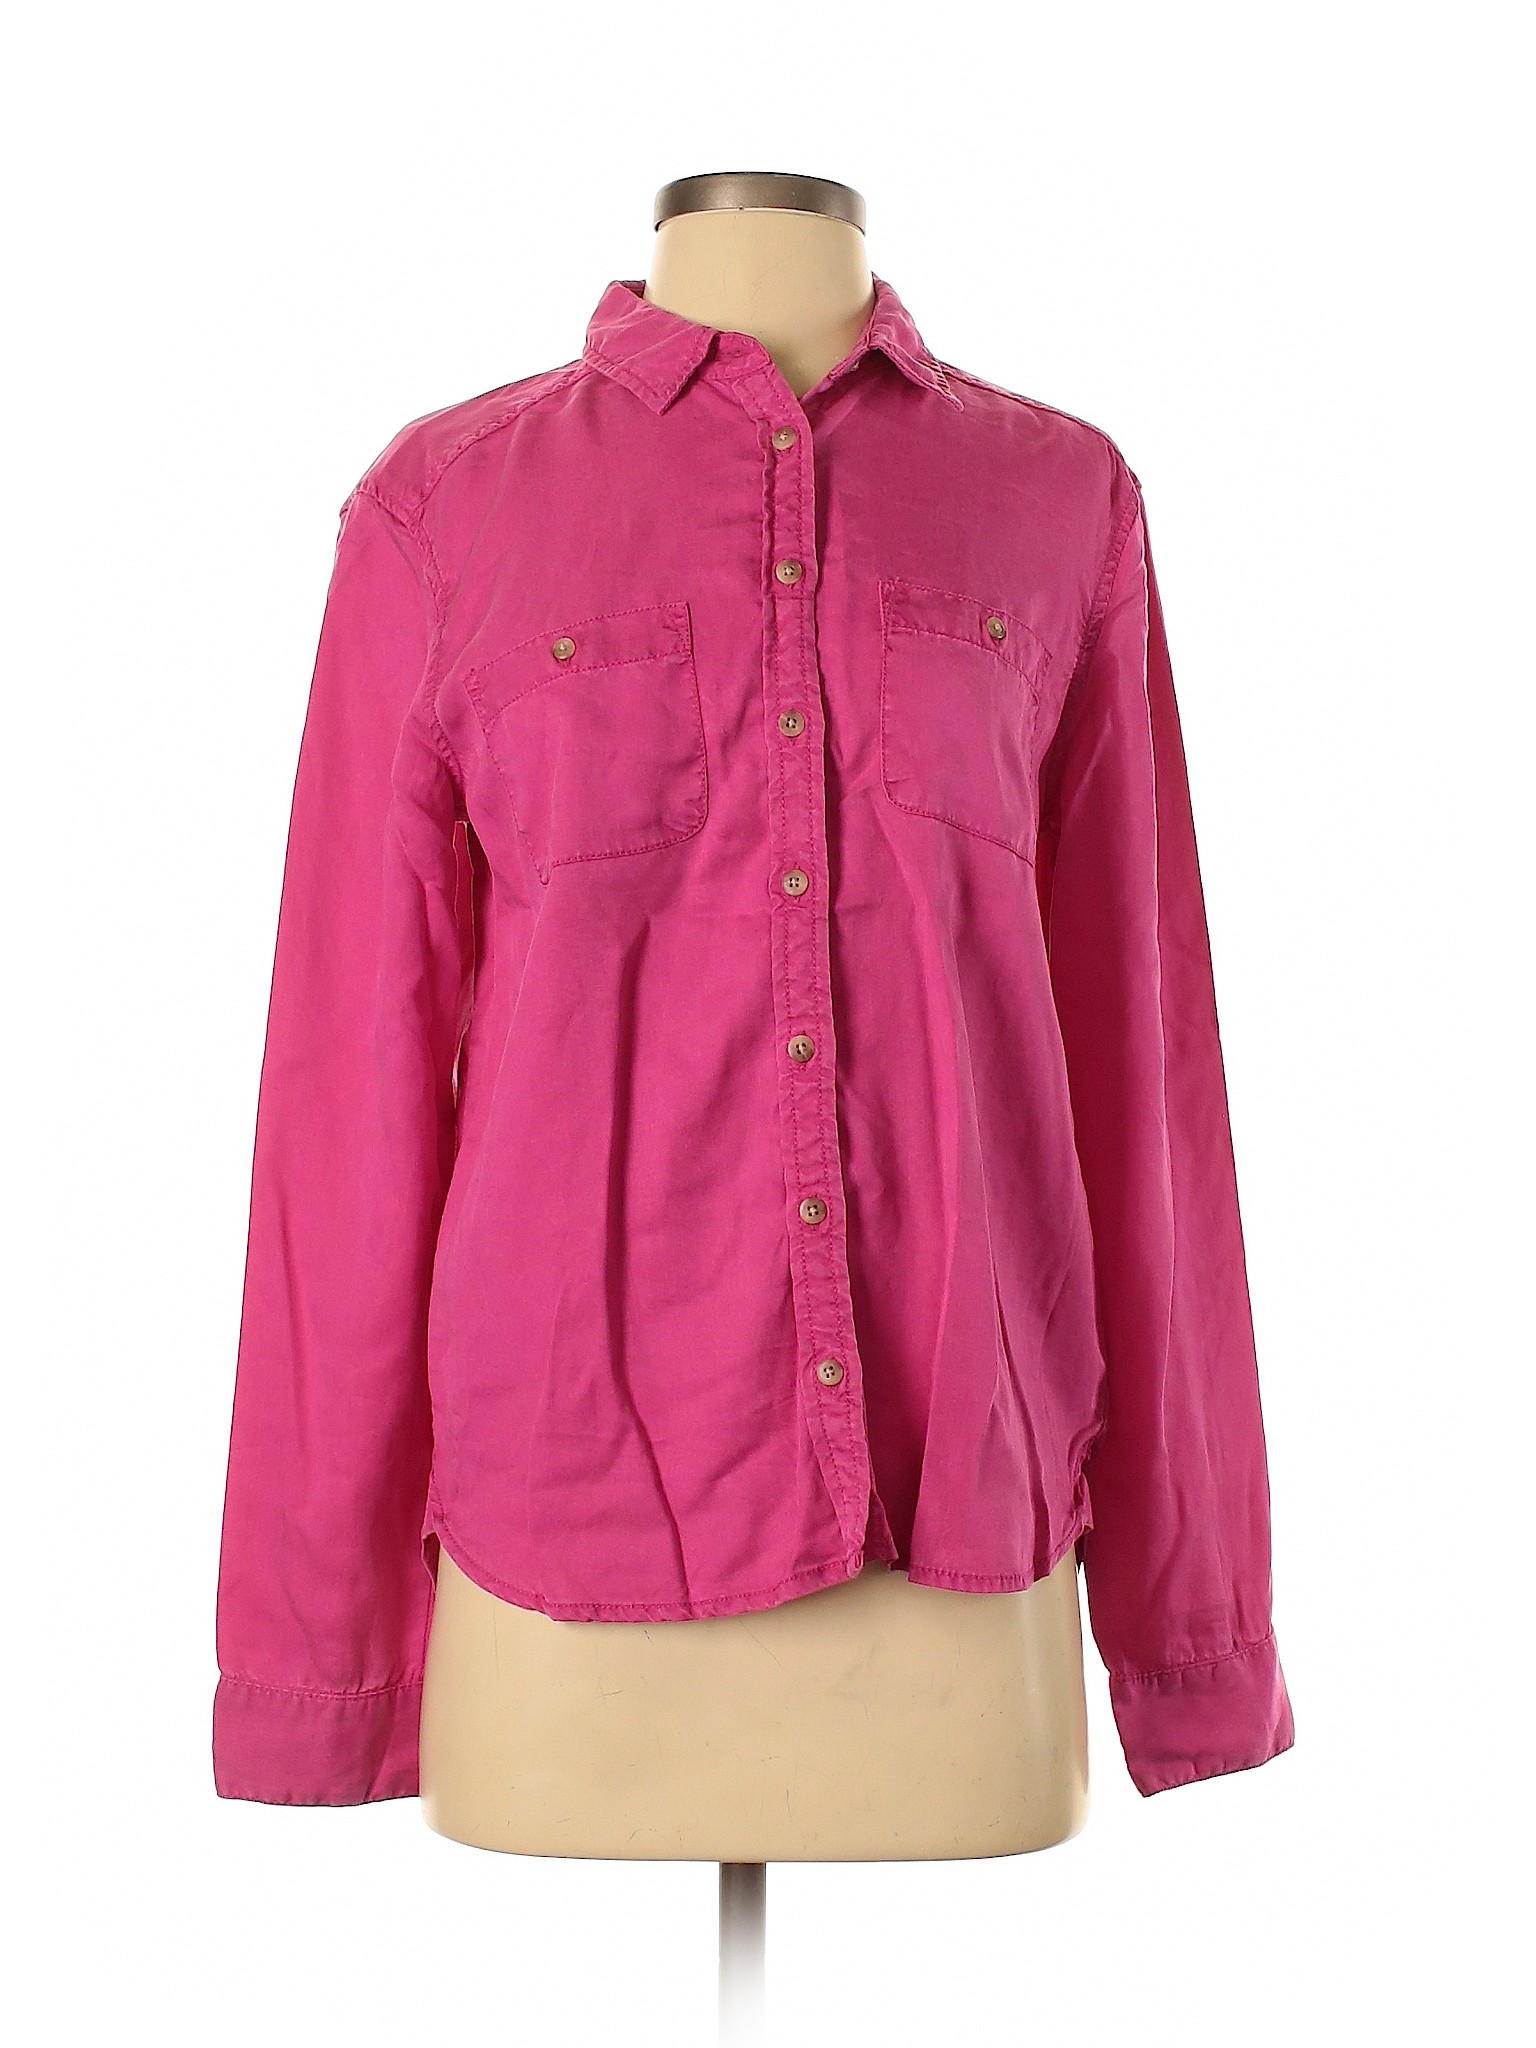 American Eagle Outfitters Women Pink Long Sleeve Button-Down Shirt S | eBay